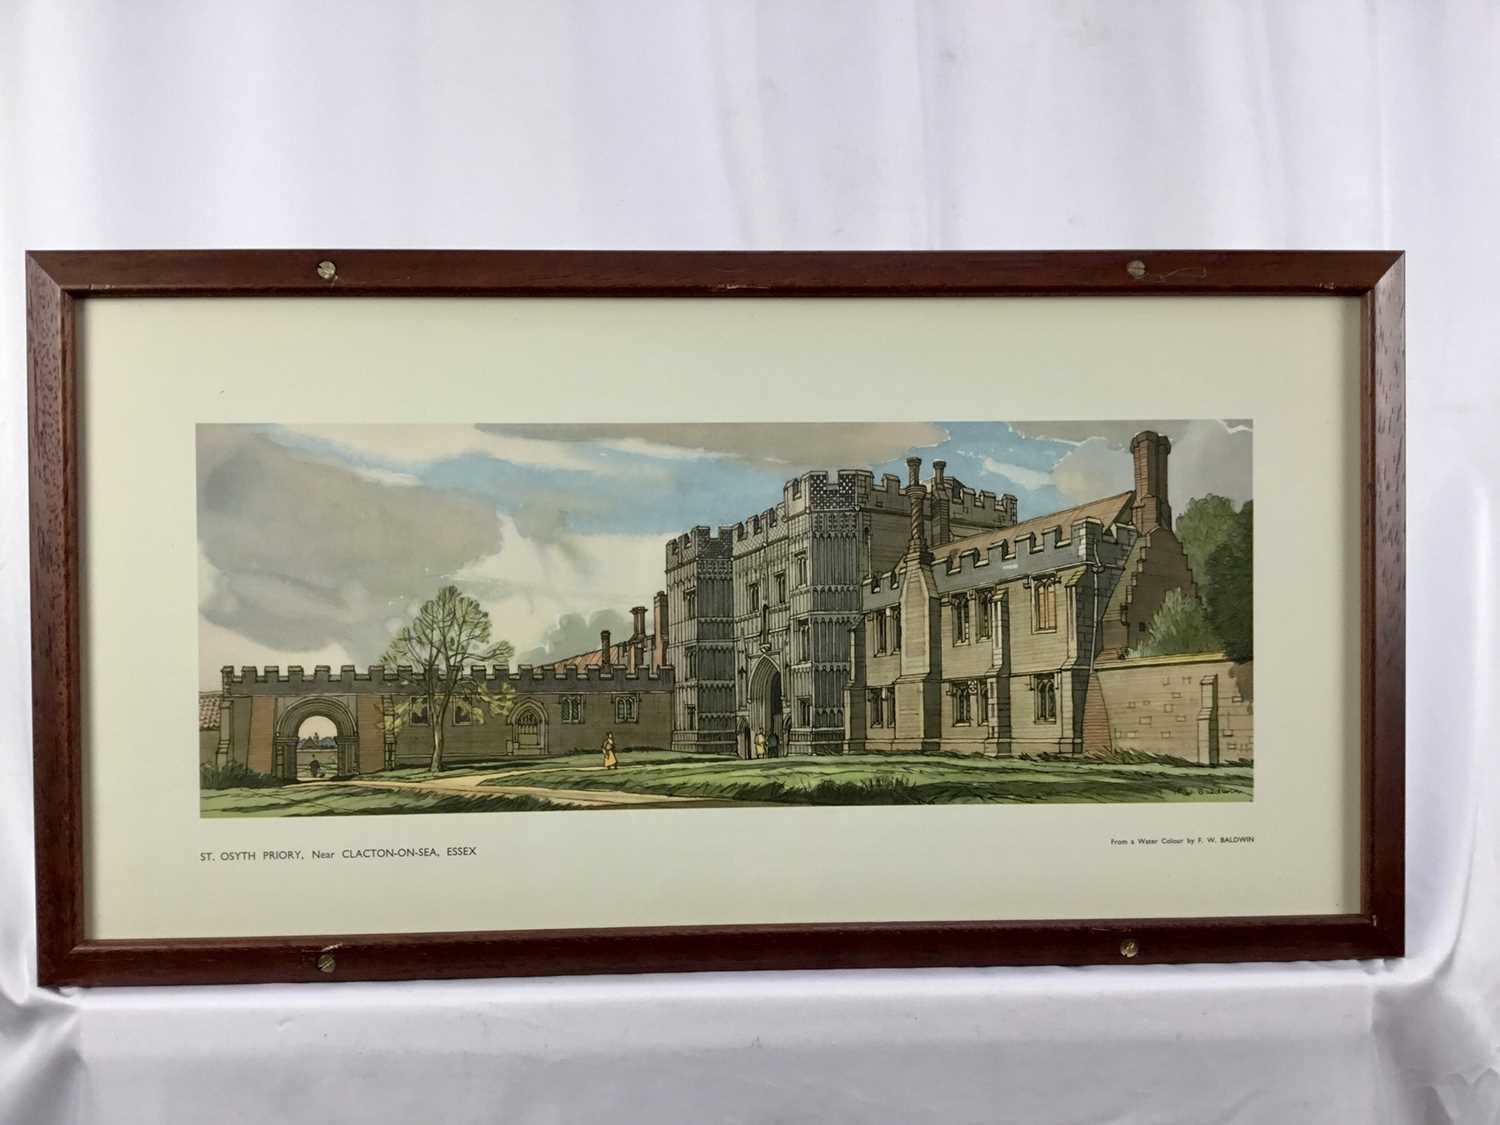 Original Railway Carriage Print/ Poster: "ST OSYTH PRIORY, NEAR CLACTON, ESSEX”. Artwork by Fred W B - Image 3 of 6